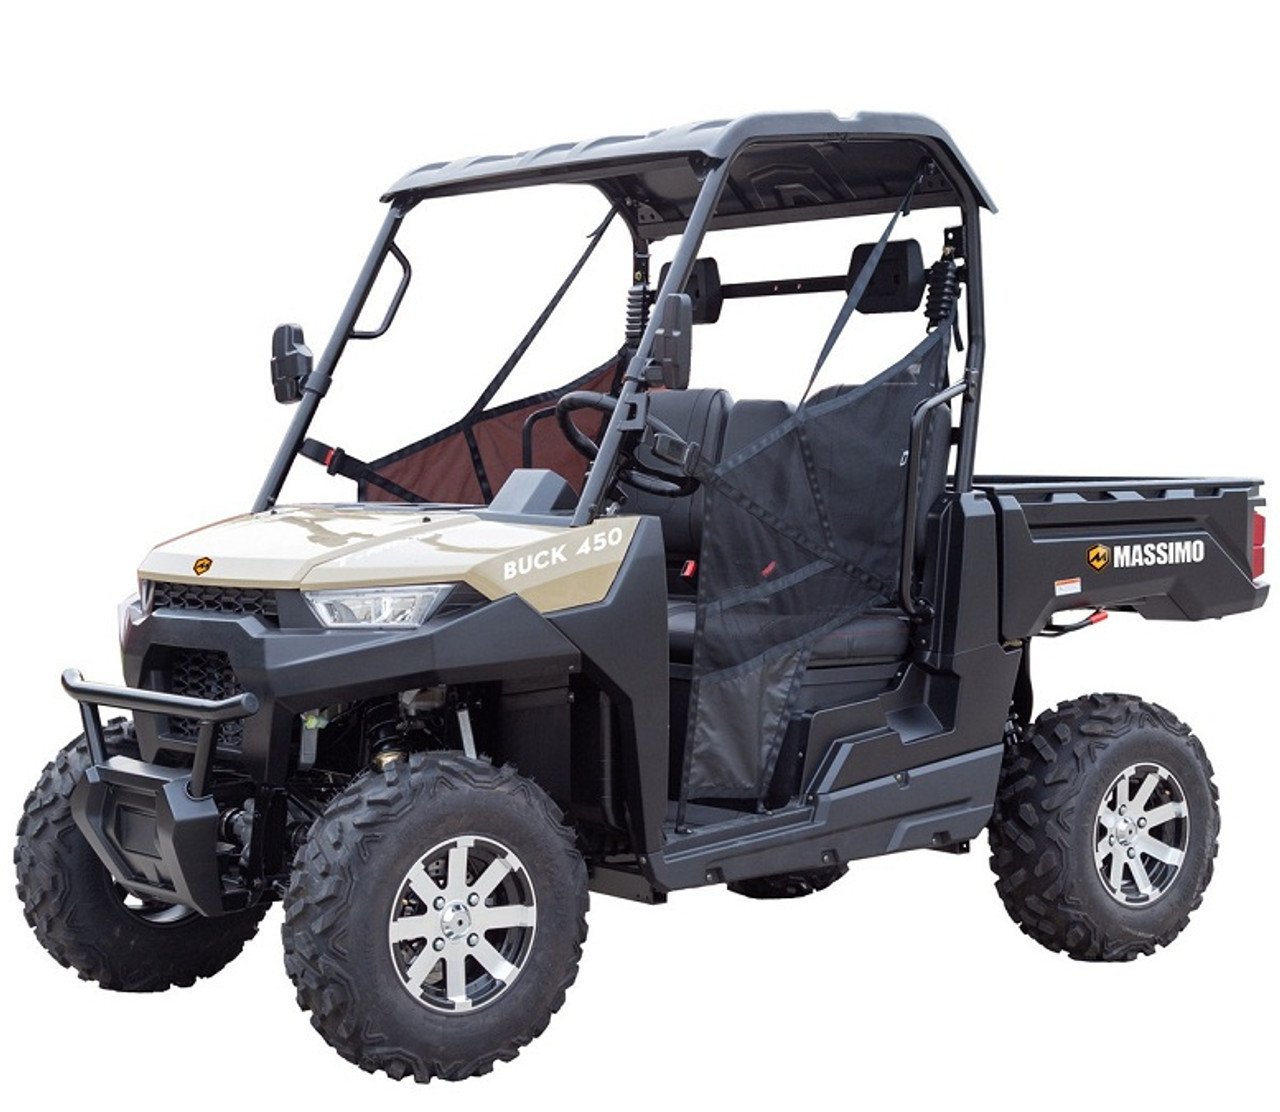 New Massimo Buck 450 On demand 4WD with locking differential Automatic CVT shaft driven transmission